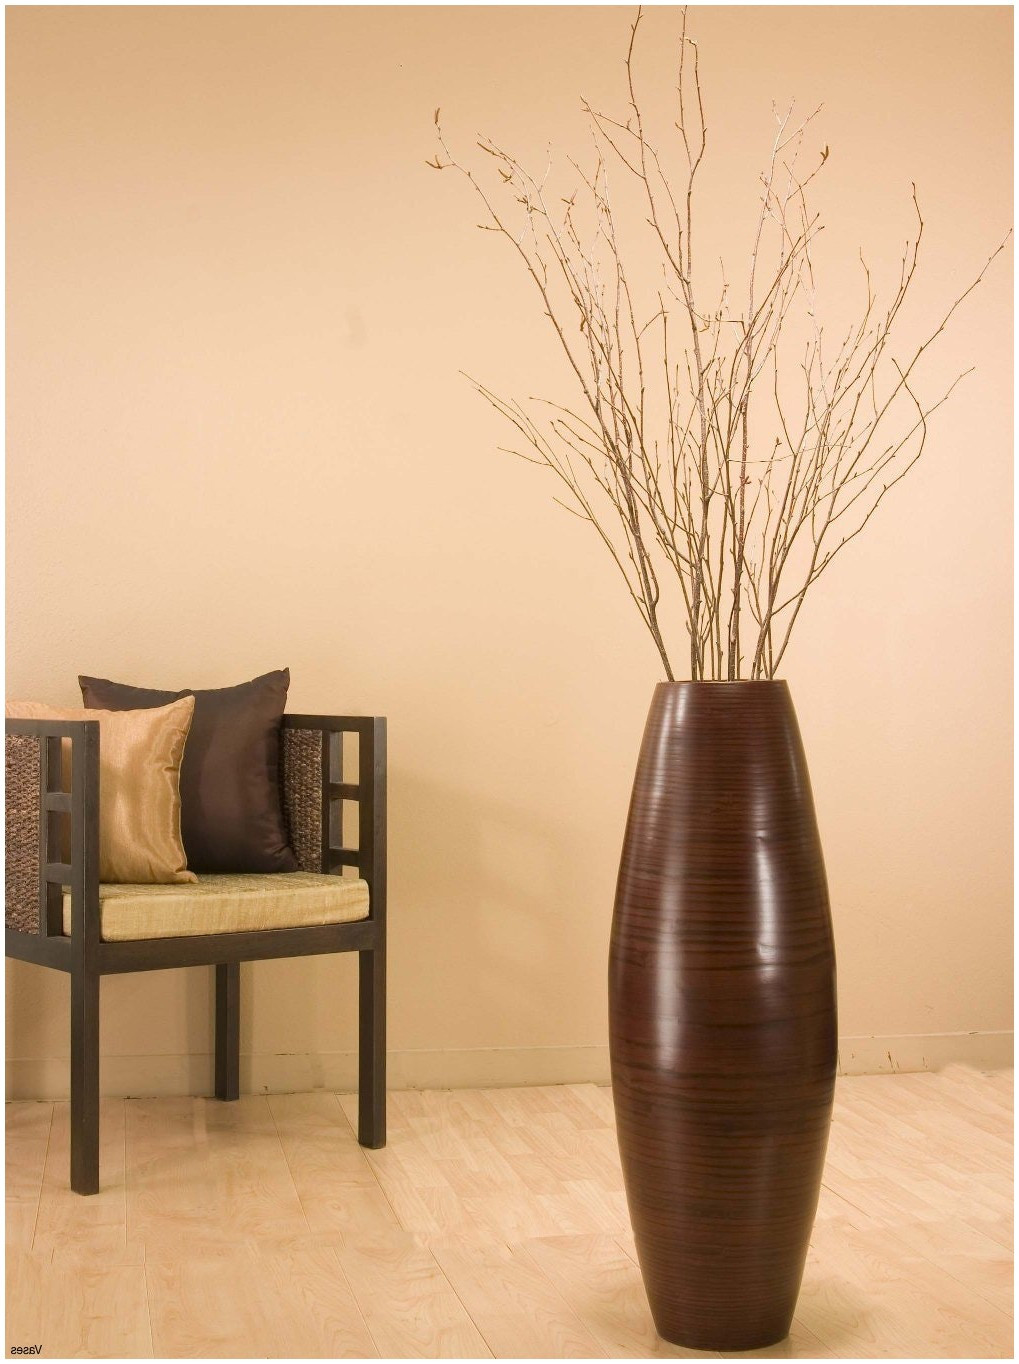 19 Unique Tall Decorative Vases and Urns 2024 free download tall decorative vases and urns of 21 beau decorative vases anciendemutu org regarding 712x0qv9hql sl1364 h vases tall green floor decorative standing with branchesi 0d